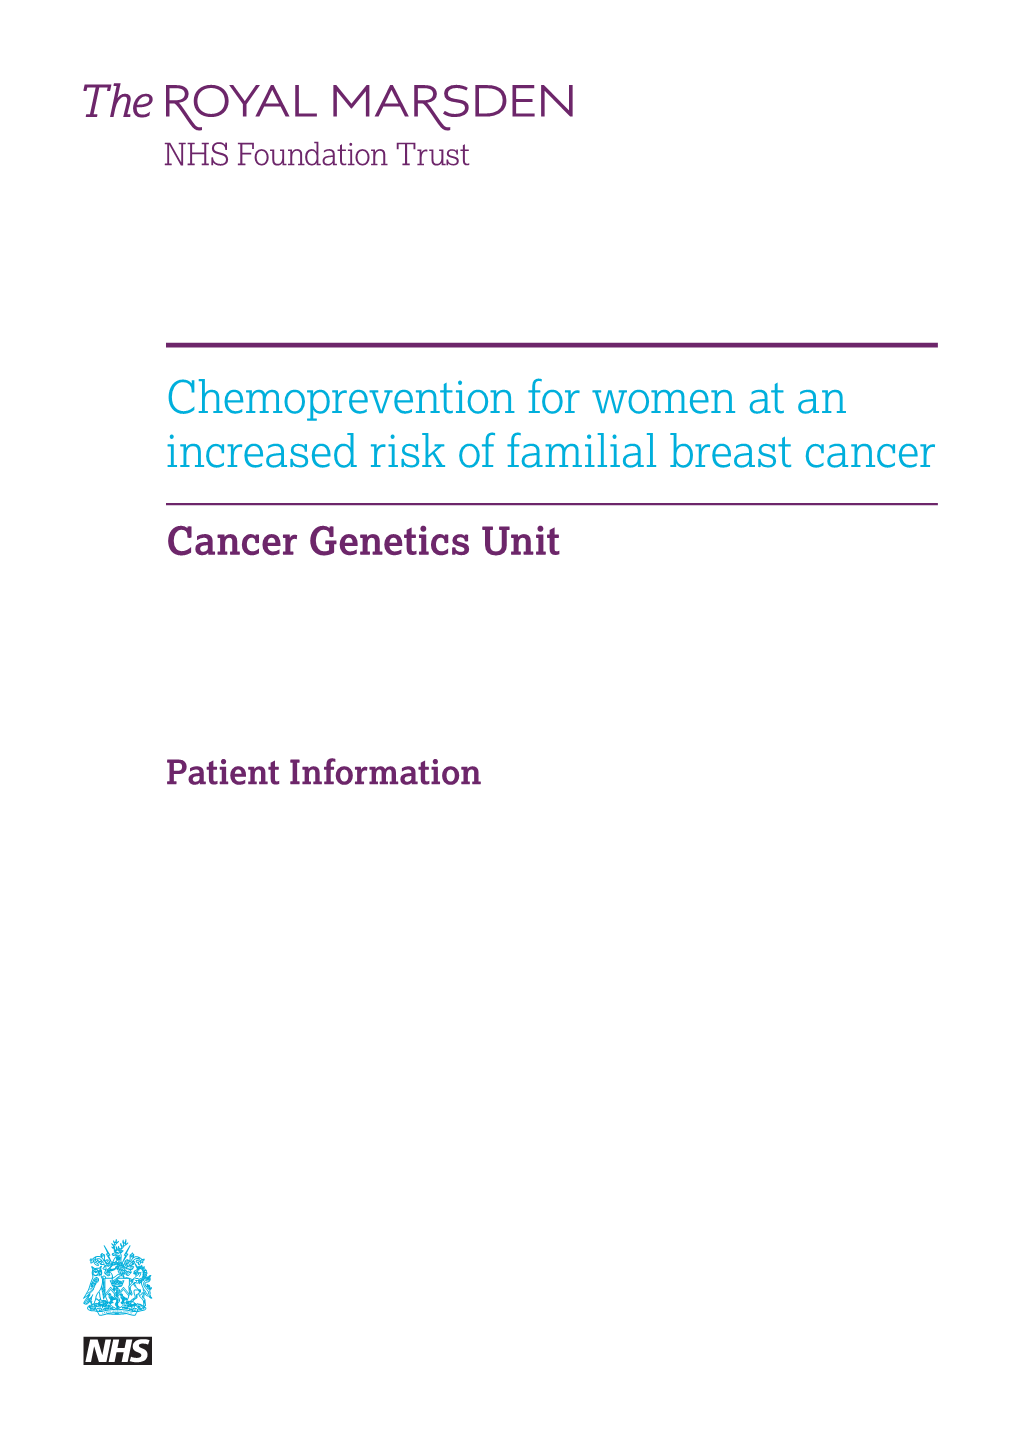 Chemoprevention for Women at an Increased Risk of Familial Breast Cancer